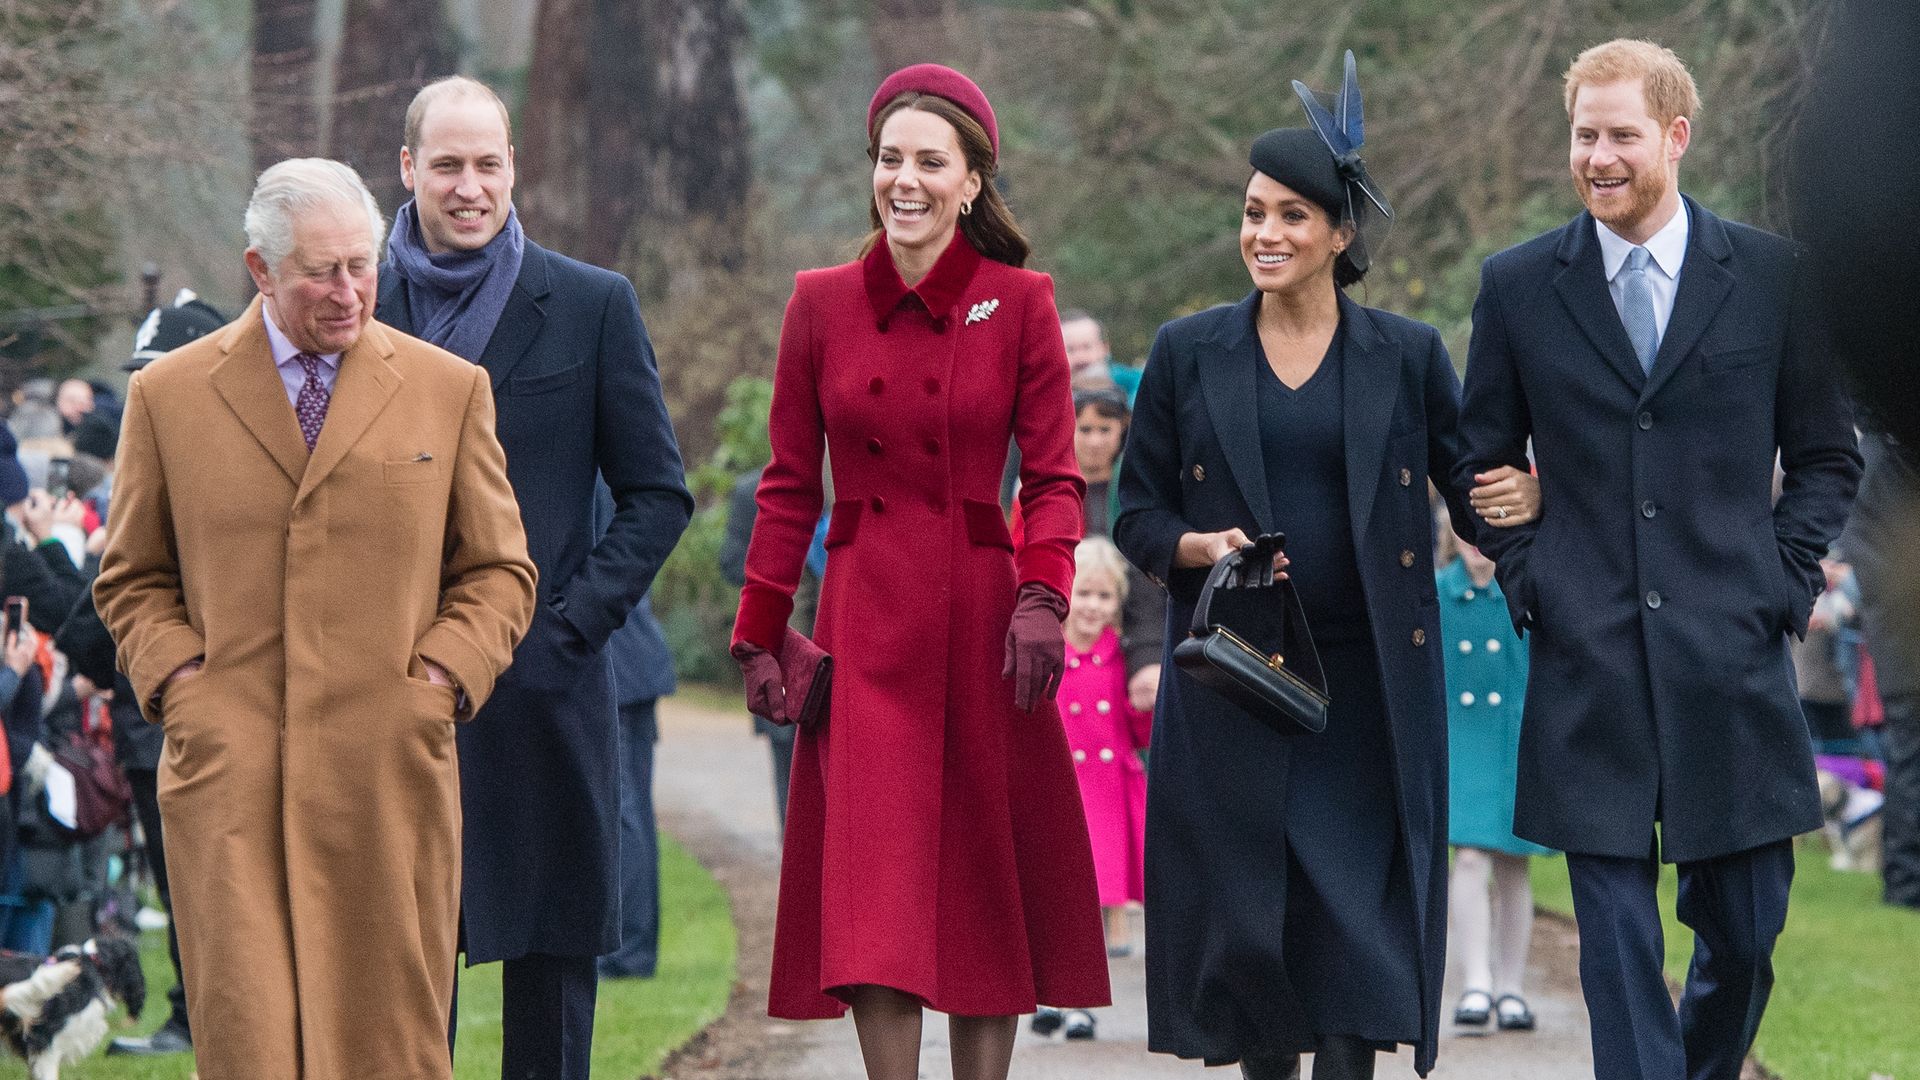 King Charles walking with Prince William, Kaye Middleton, Meghan Markle and Prince Harry